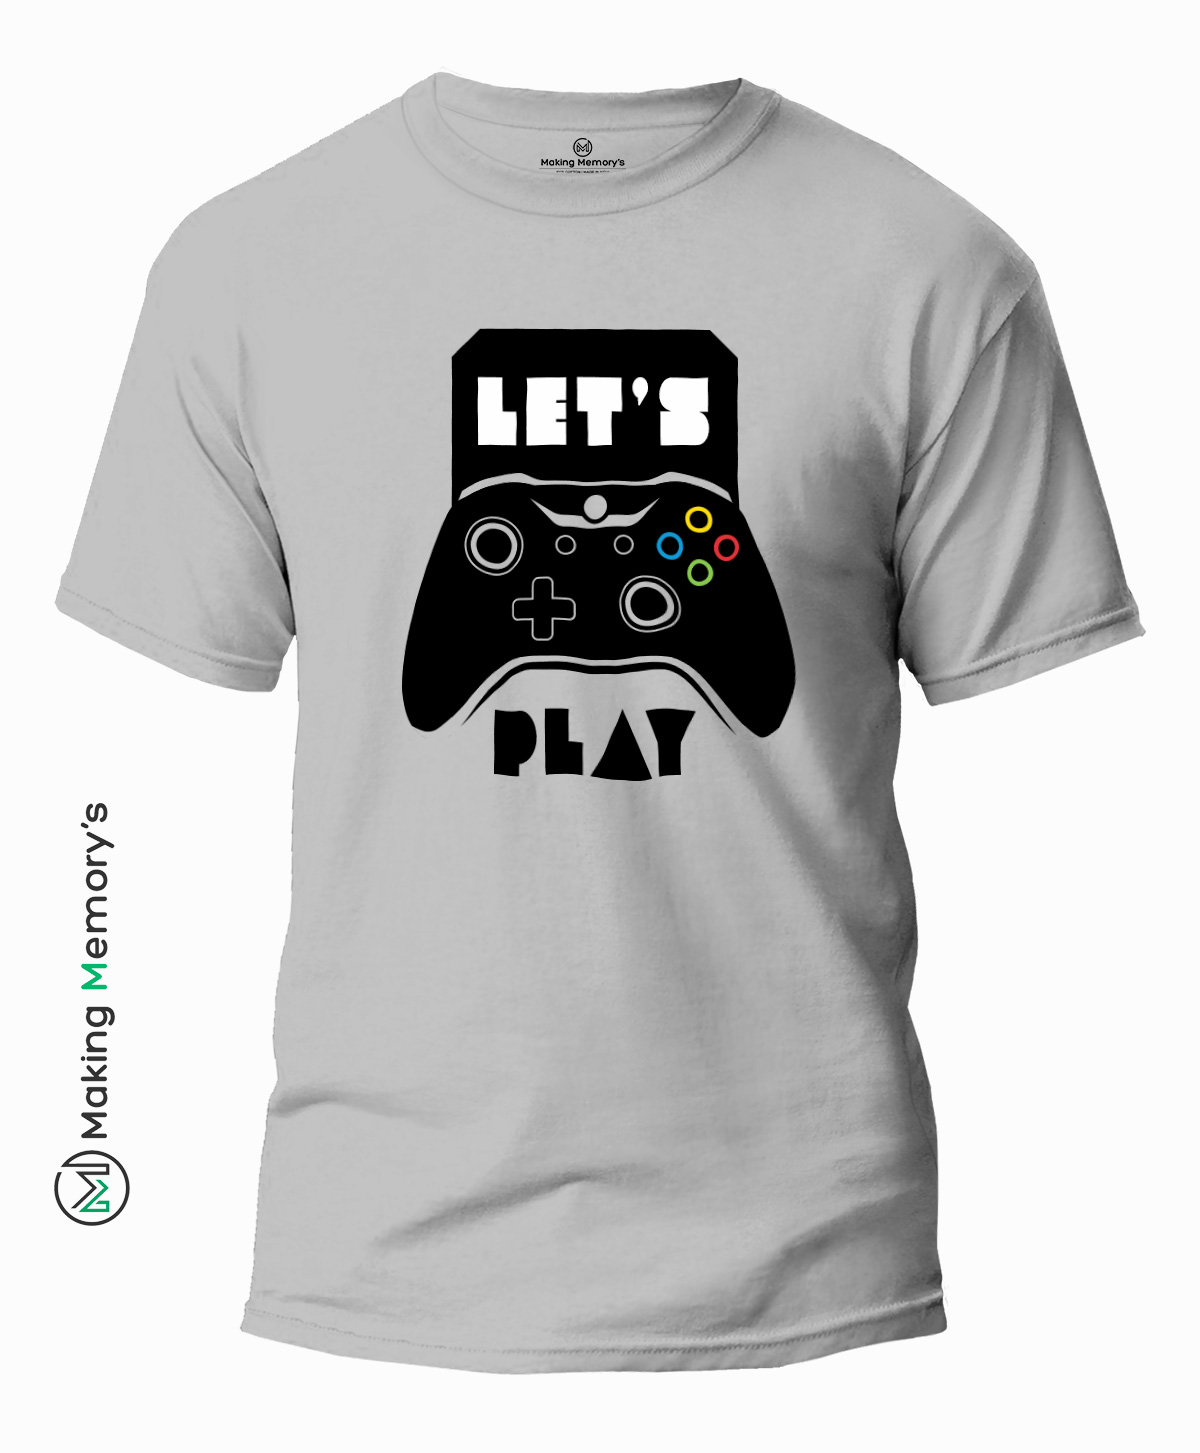 Let’s-Play-Gray-T-Shirt